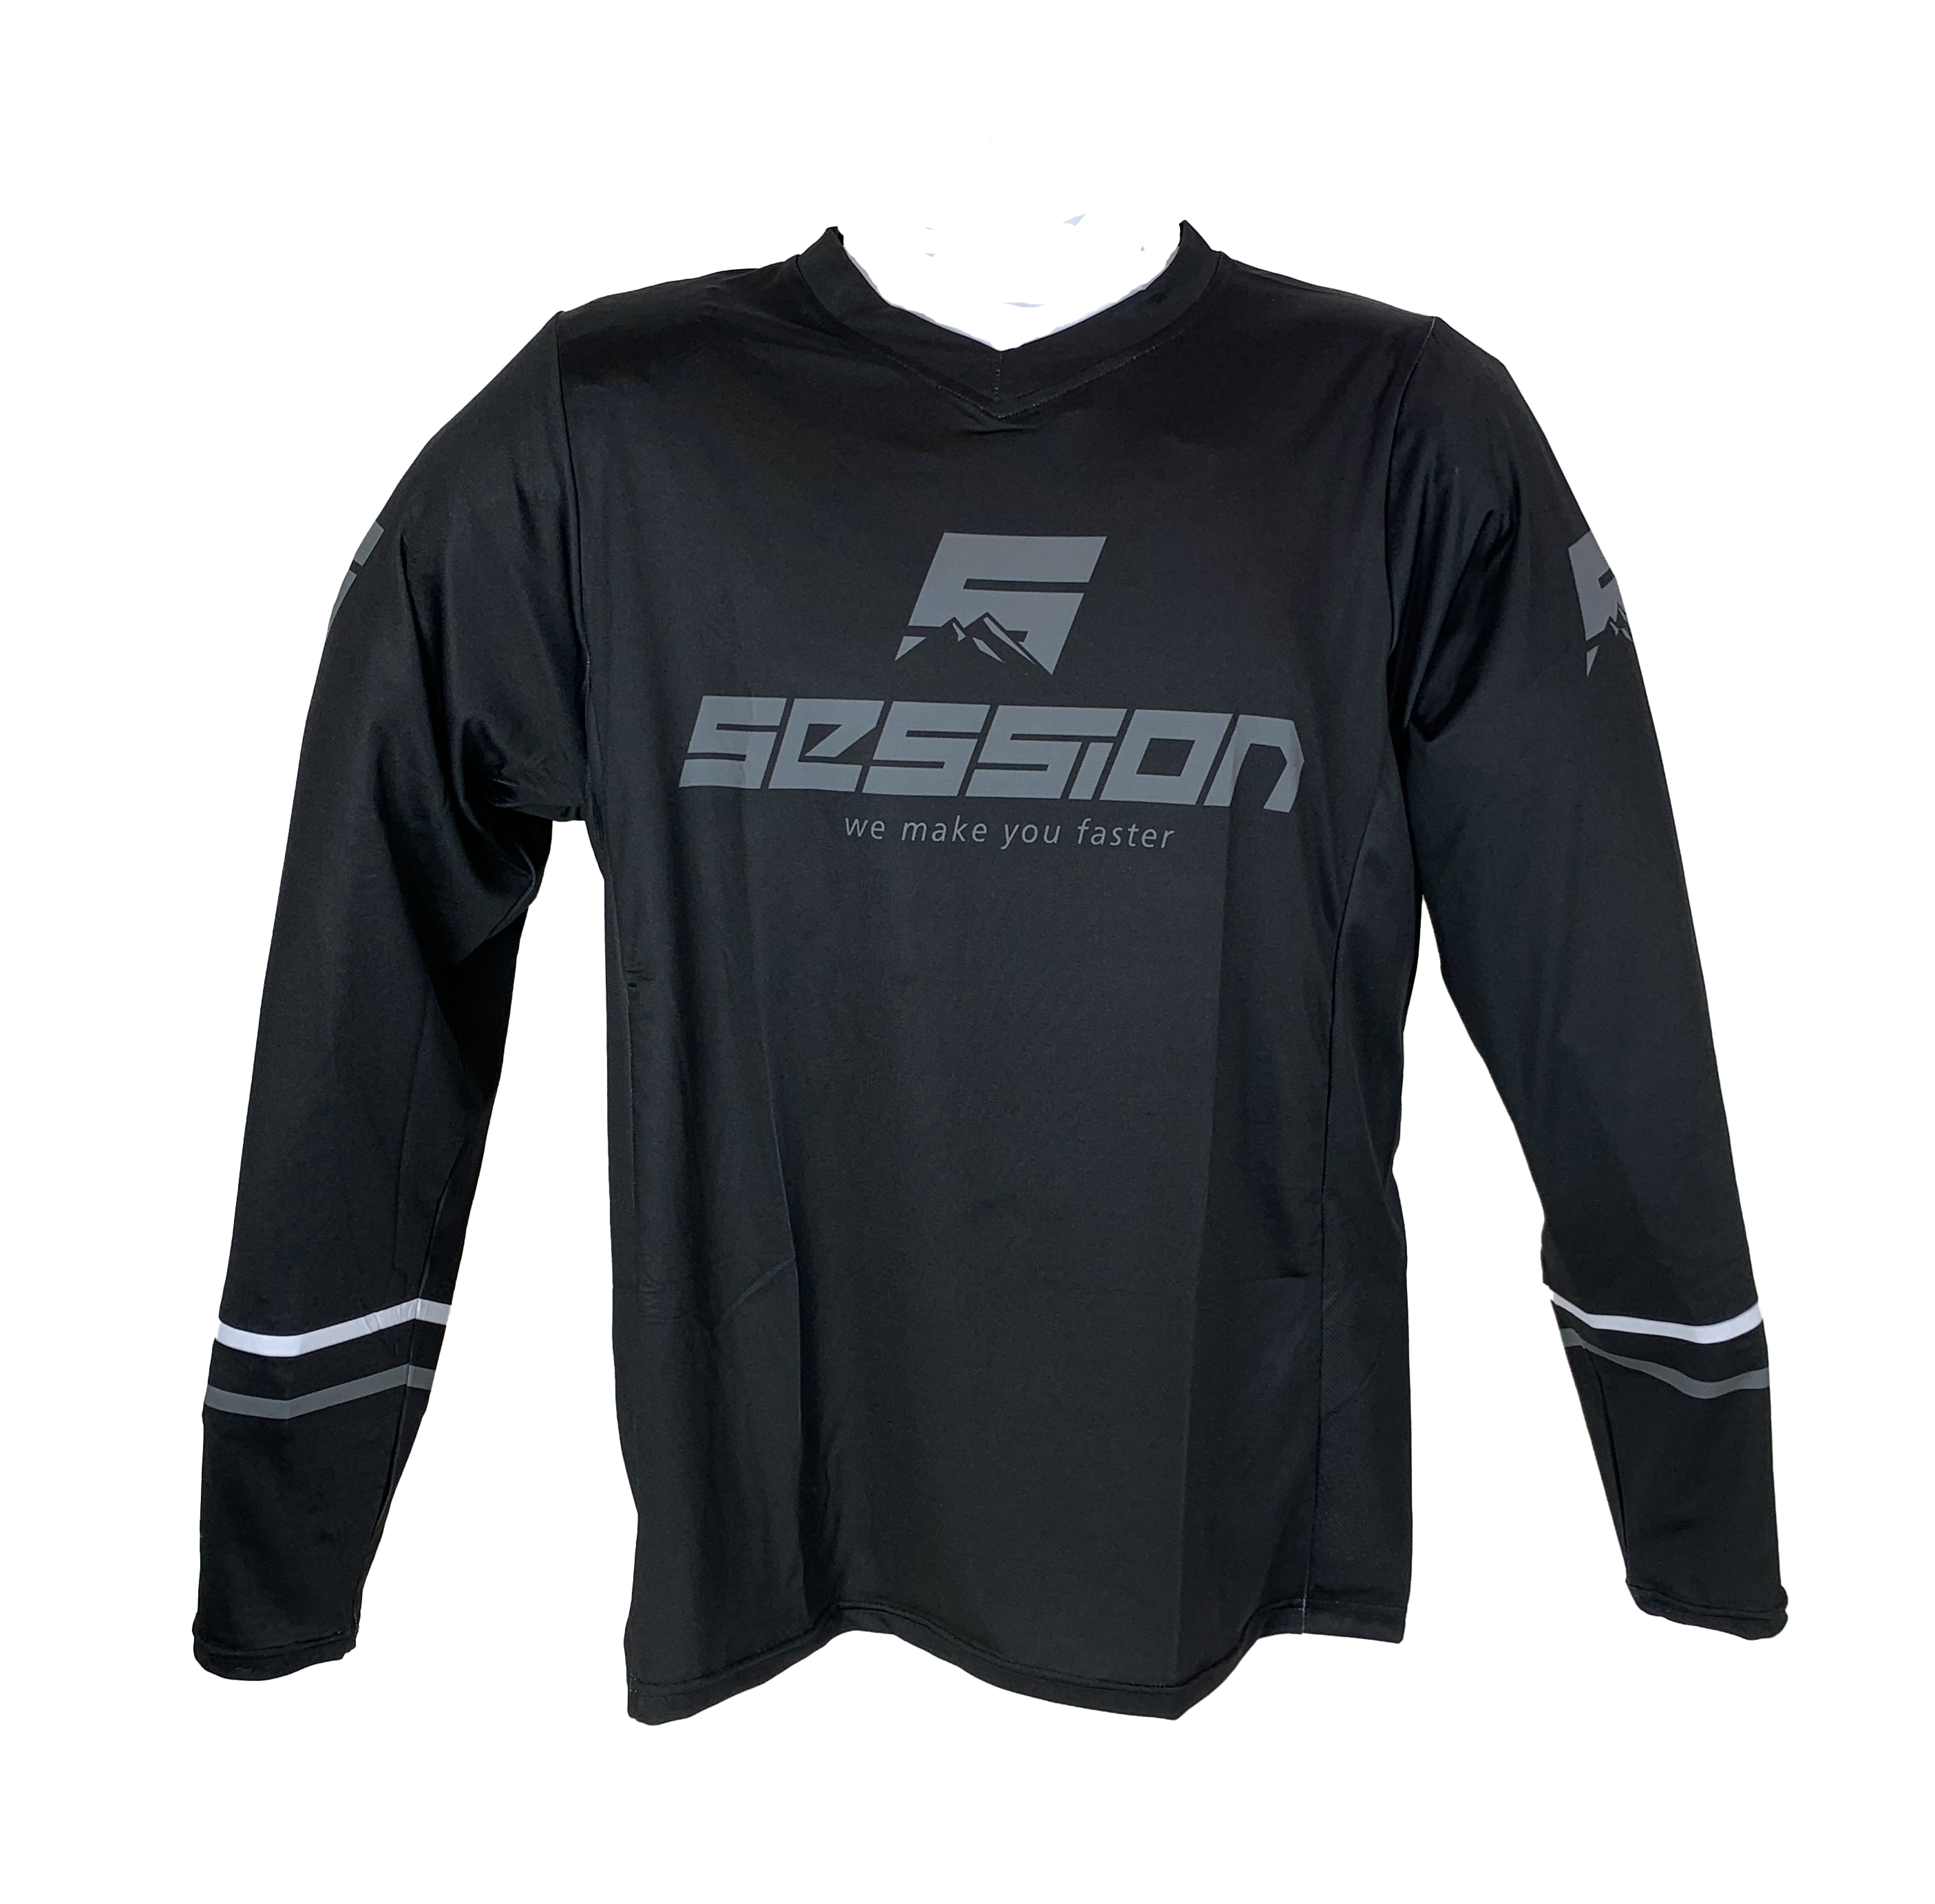 Jersey Session - Long Sleeve